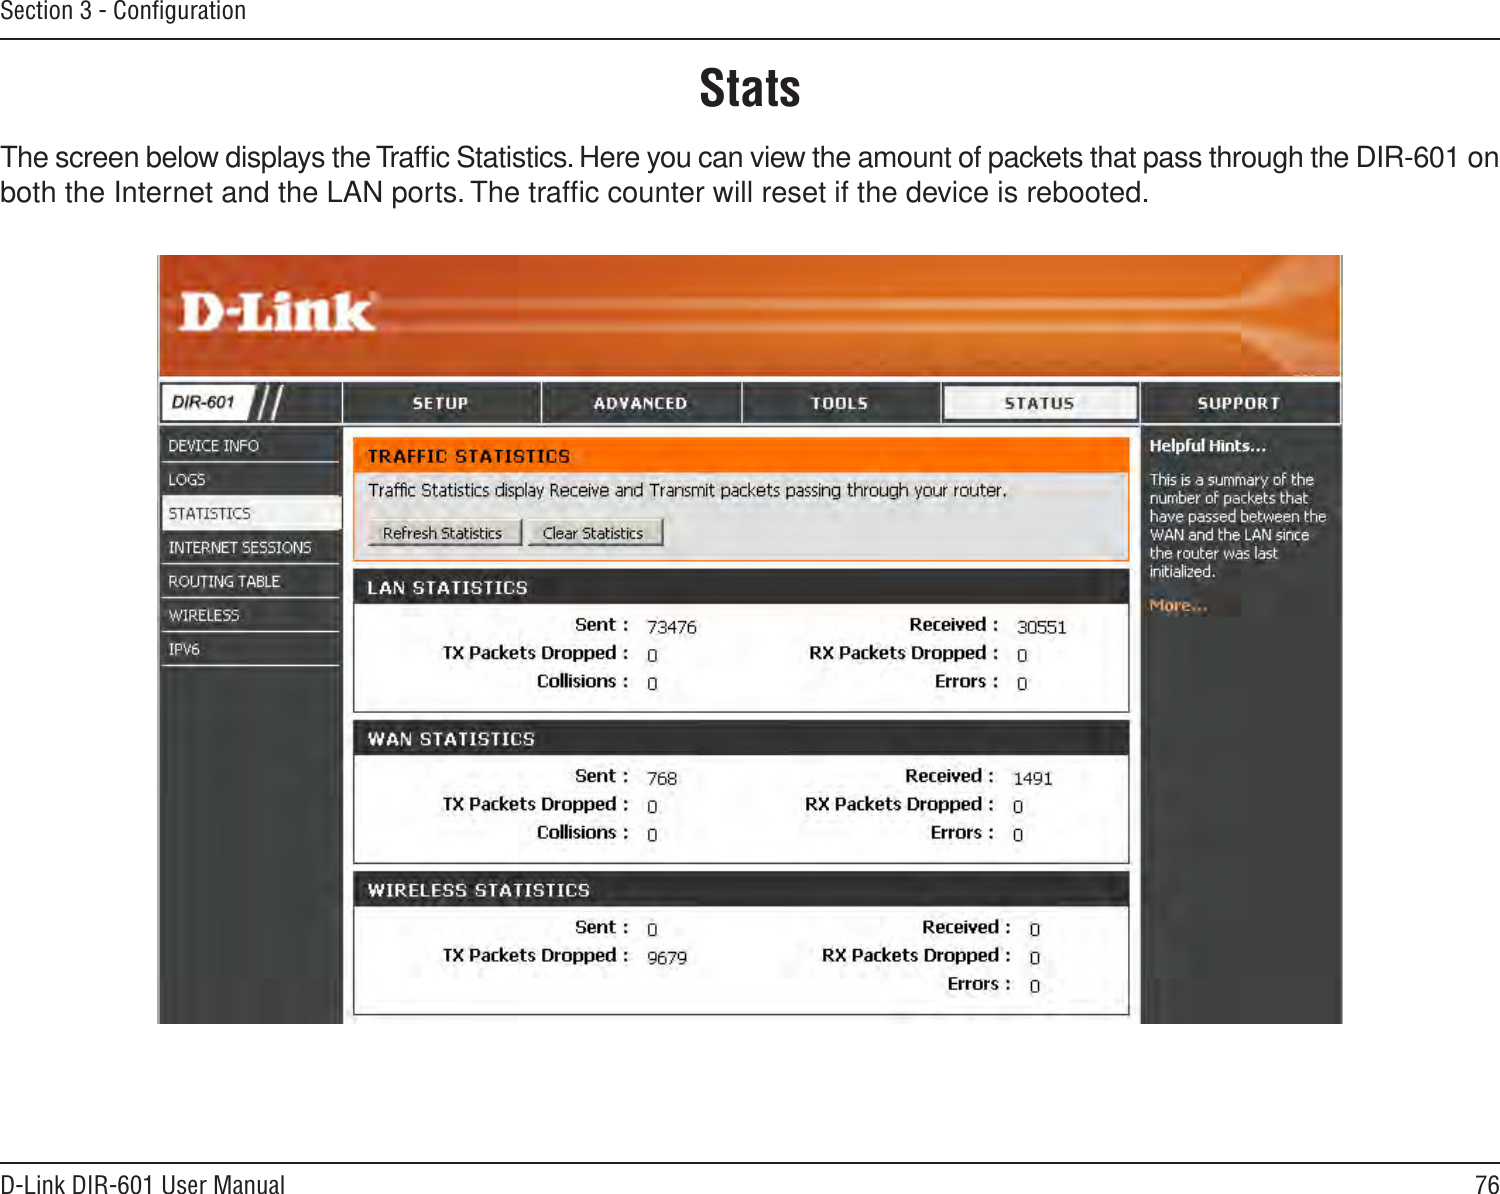 76D-Link DIR-601 User ManualSection 3 - ConﬁgurationStatsThe screen below displays the Trafﬁc Statistics. Here you can view the amount of packets that pass through the DIR-601 on both the Internet and the LAN ports. The trafﬁc counter will reset if the device is rebooted.